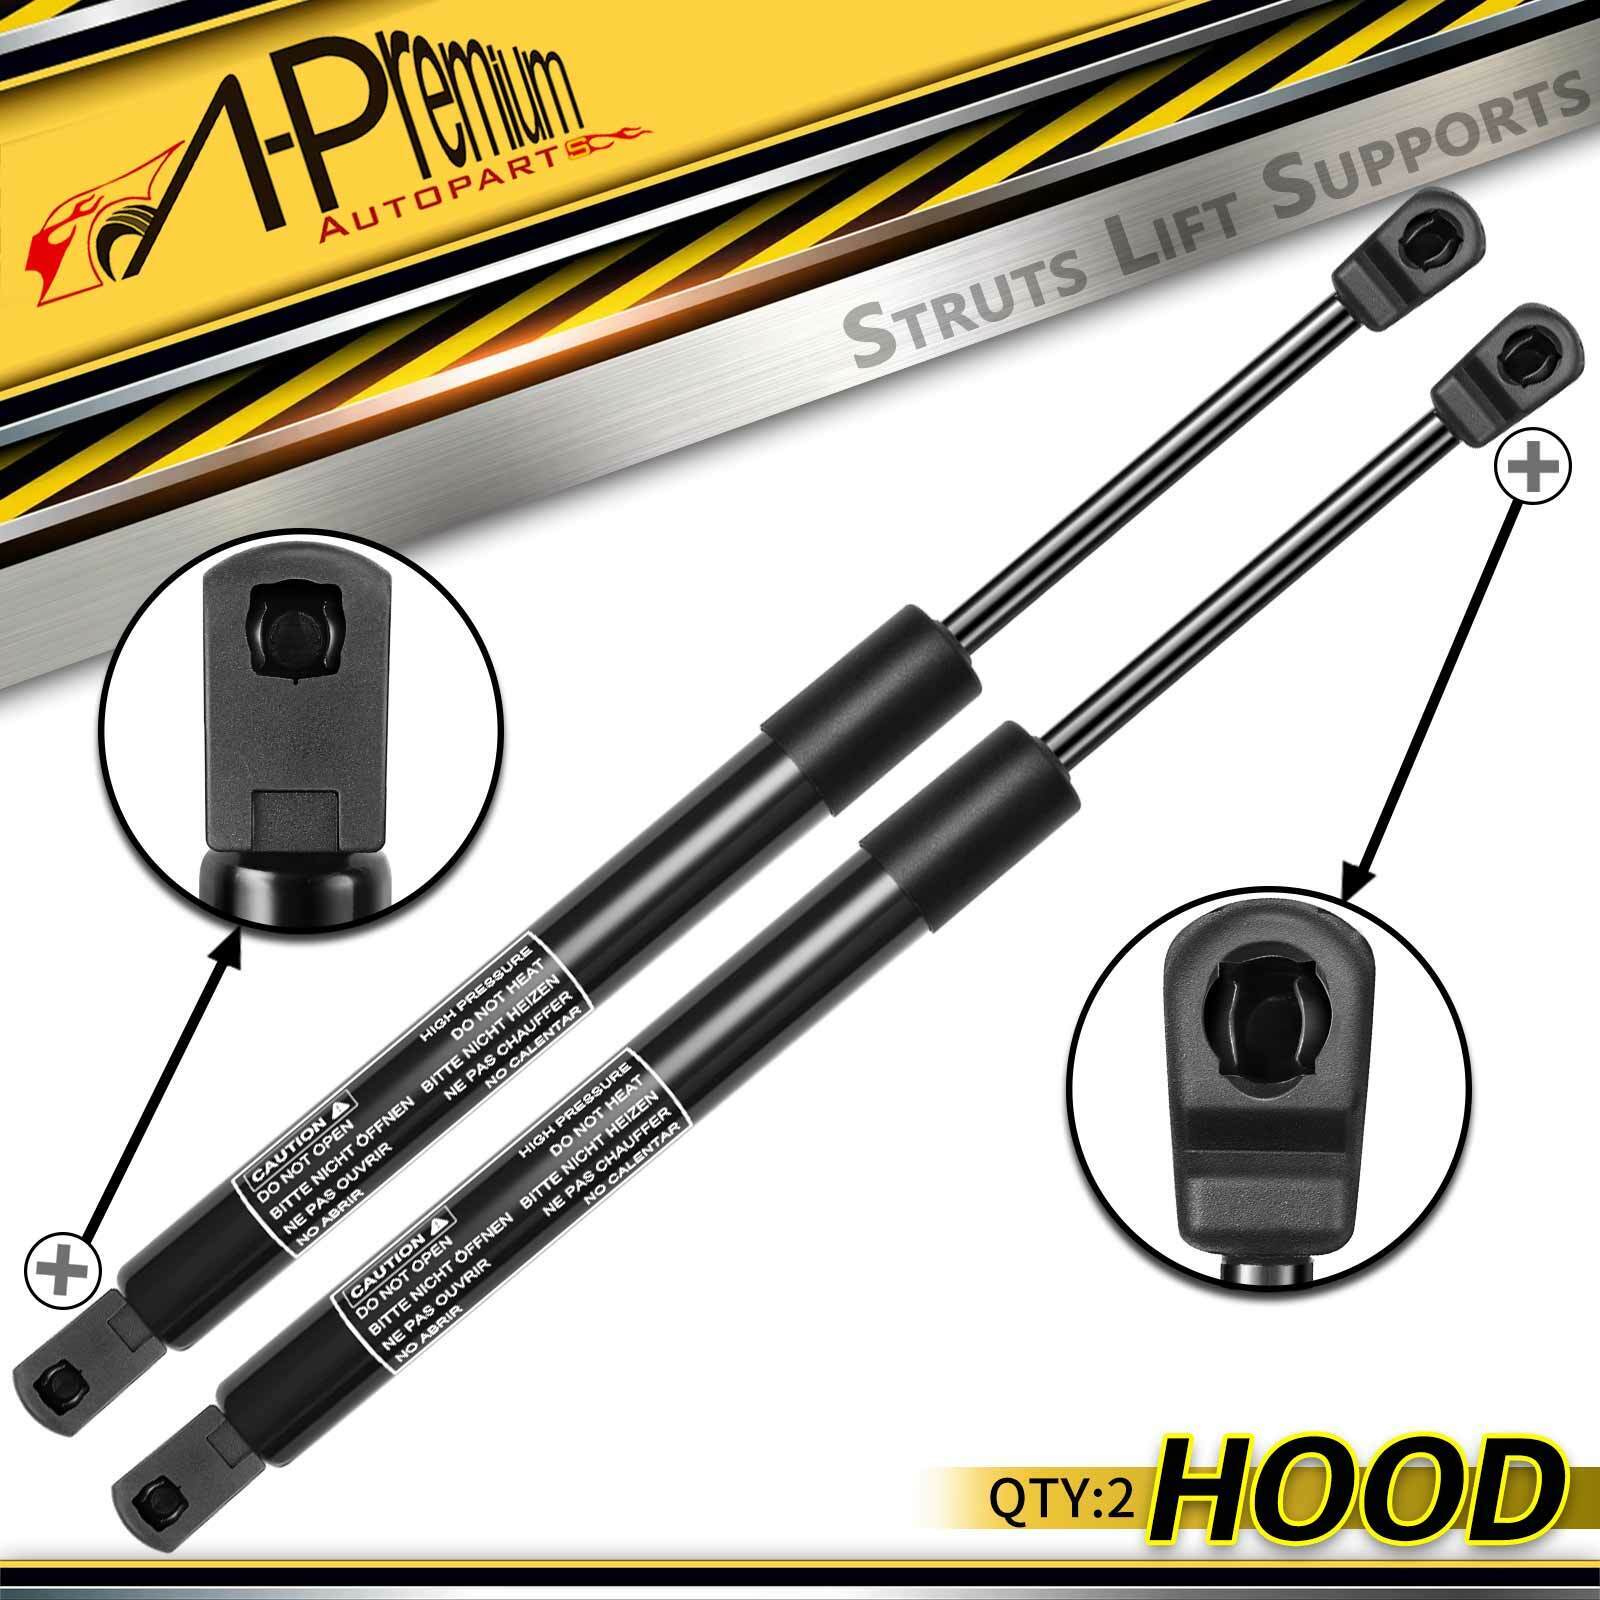 2x Front Hood Lift Supports Shocks Struts for Ford Expedition F-150 F-250 95-06